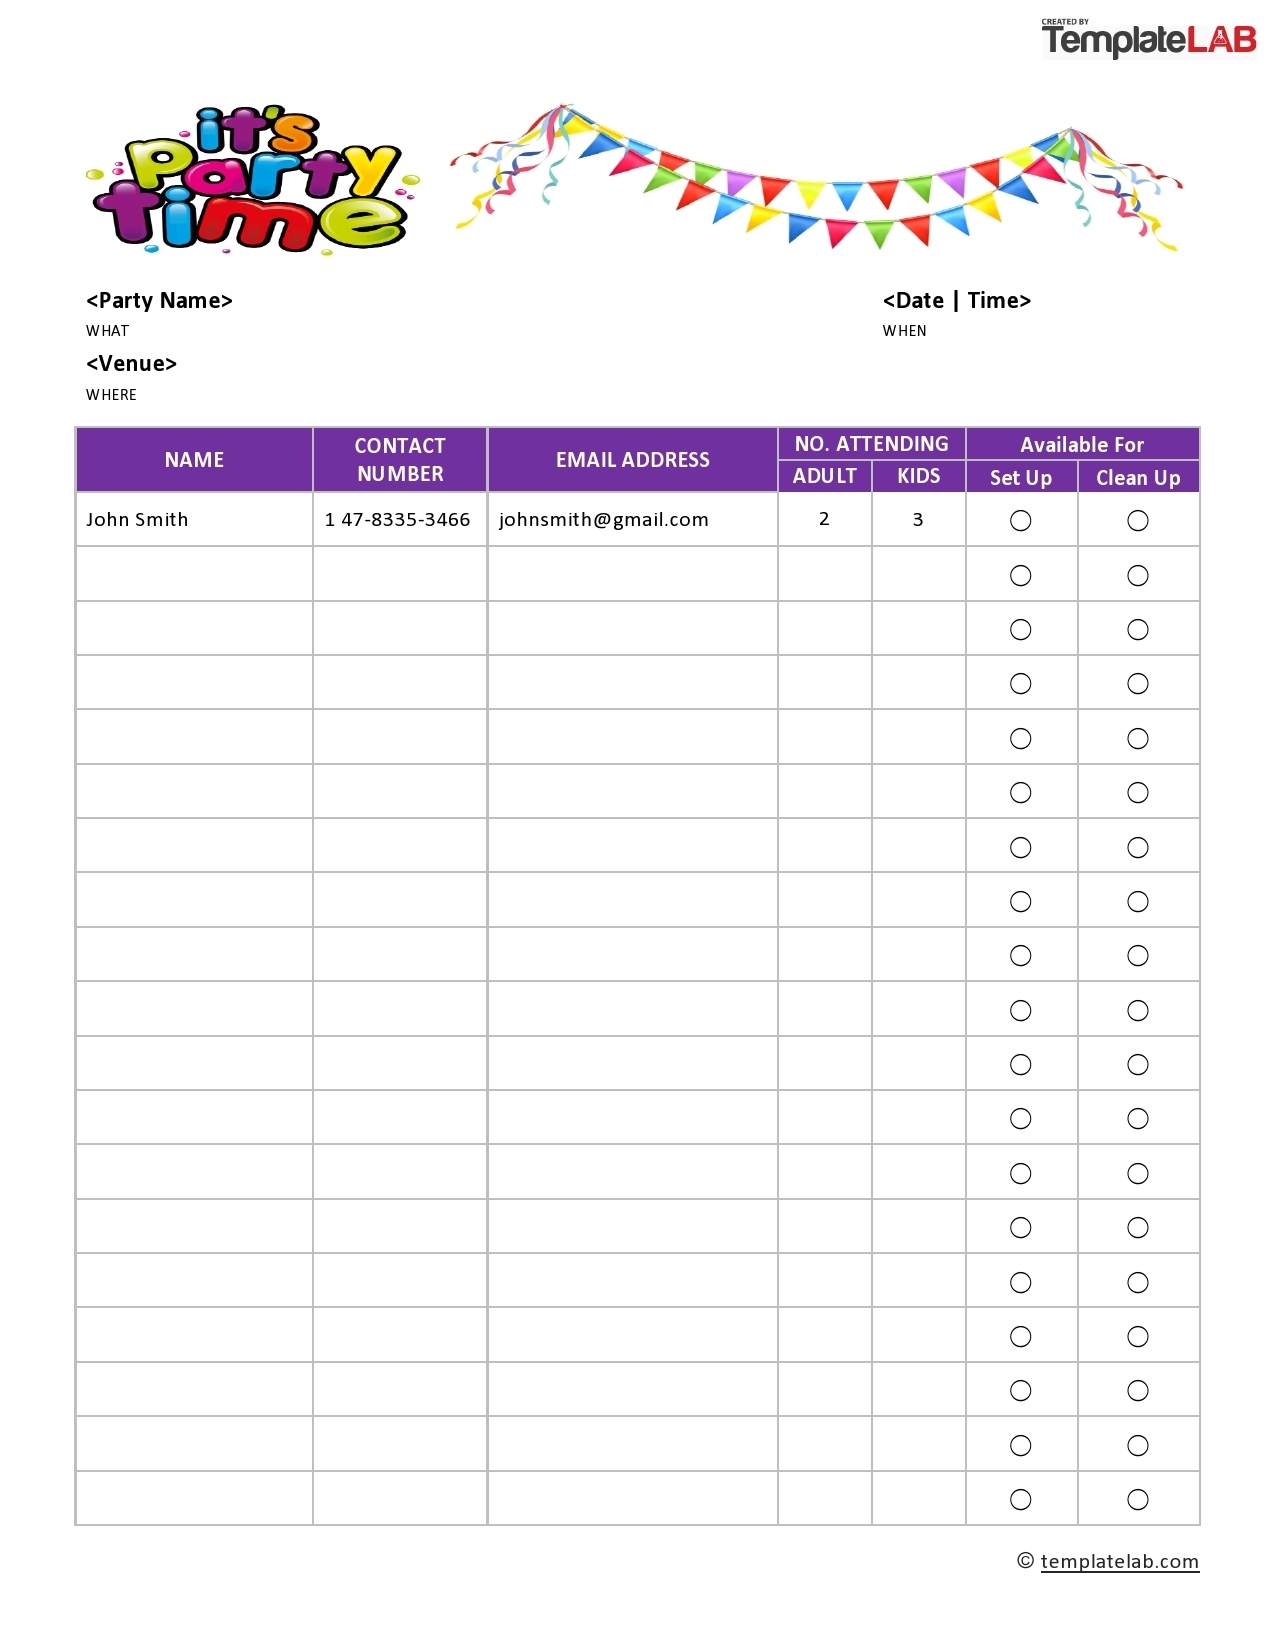 Take Time Slot Sign Up Sheet Template Excel